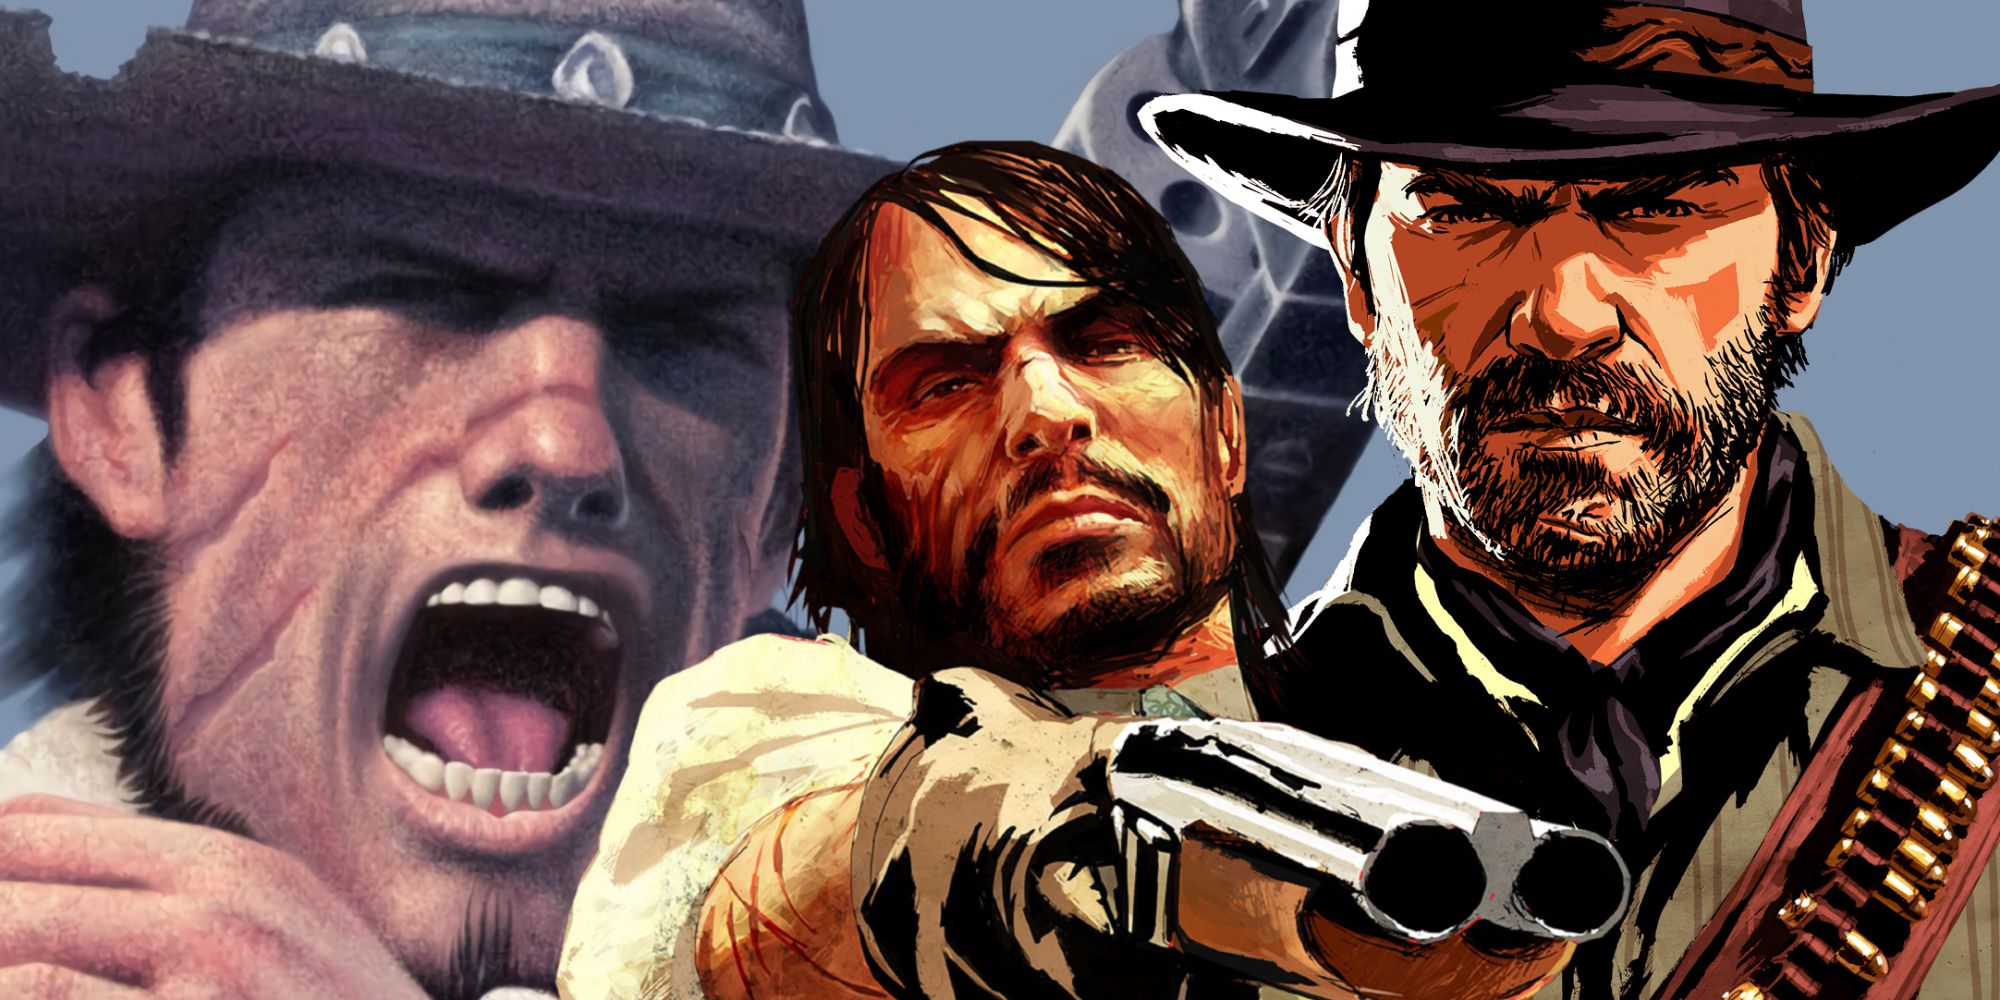 The three protagonists of the Red Dead series - Red Harlow from Revolver, yelling and firing a revolver; John Marston from Redemption, pointing a sawed off shotgun; and Arthur Morgan, staring straight ahead.